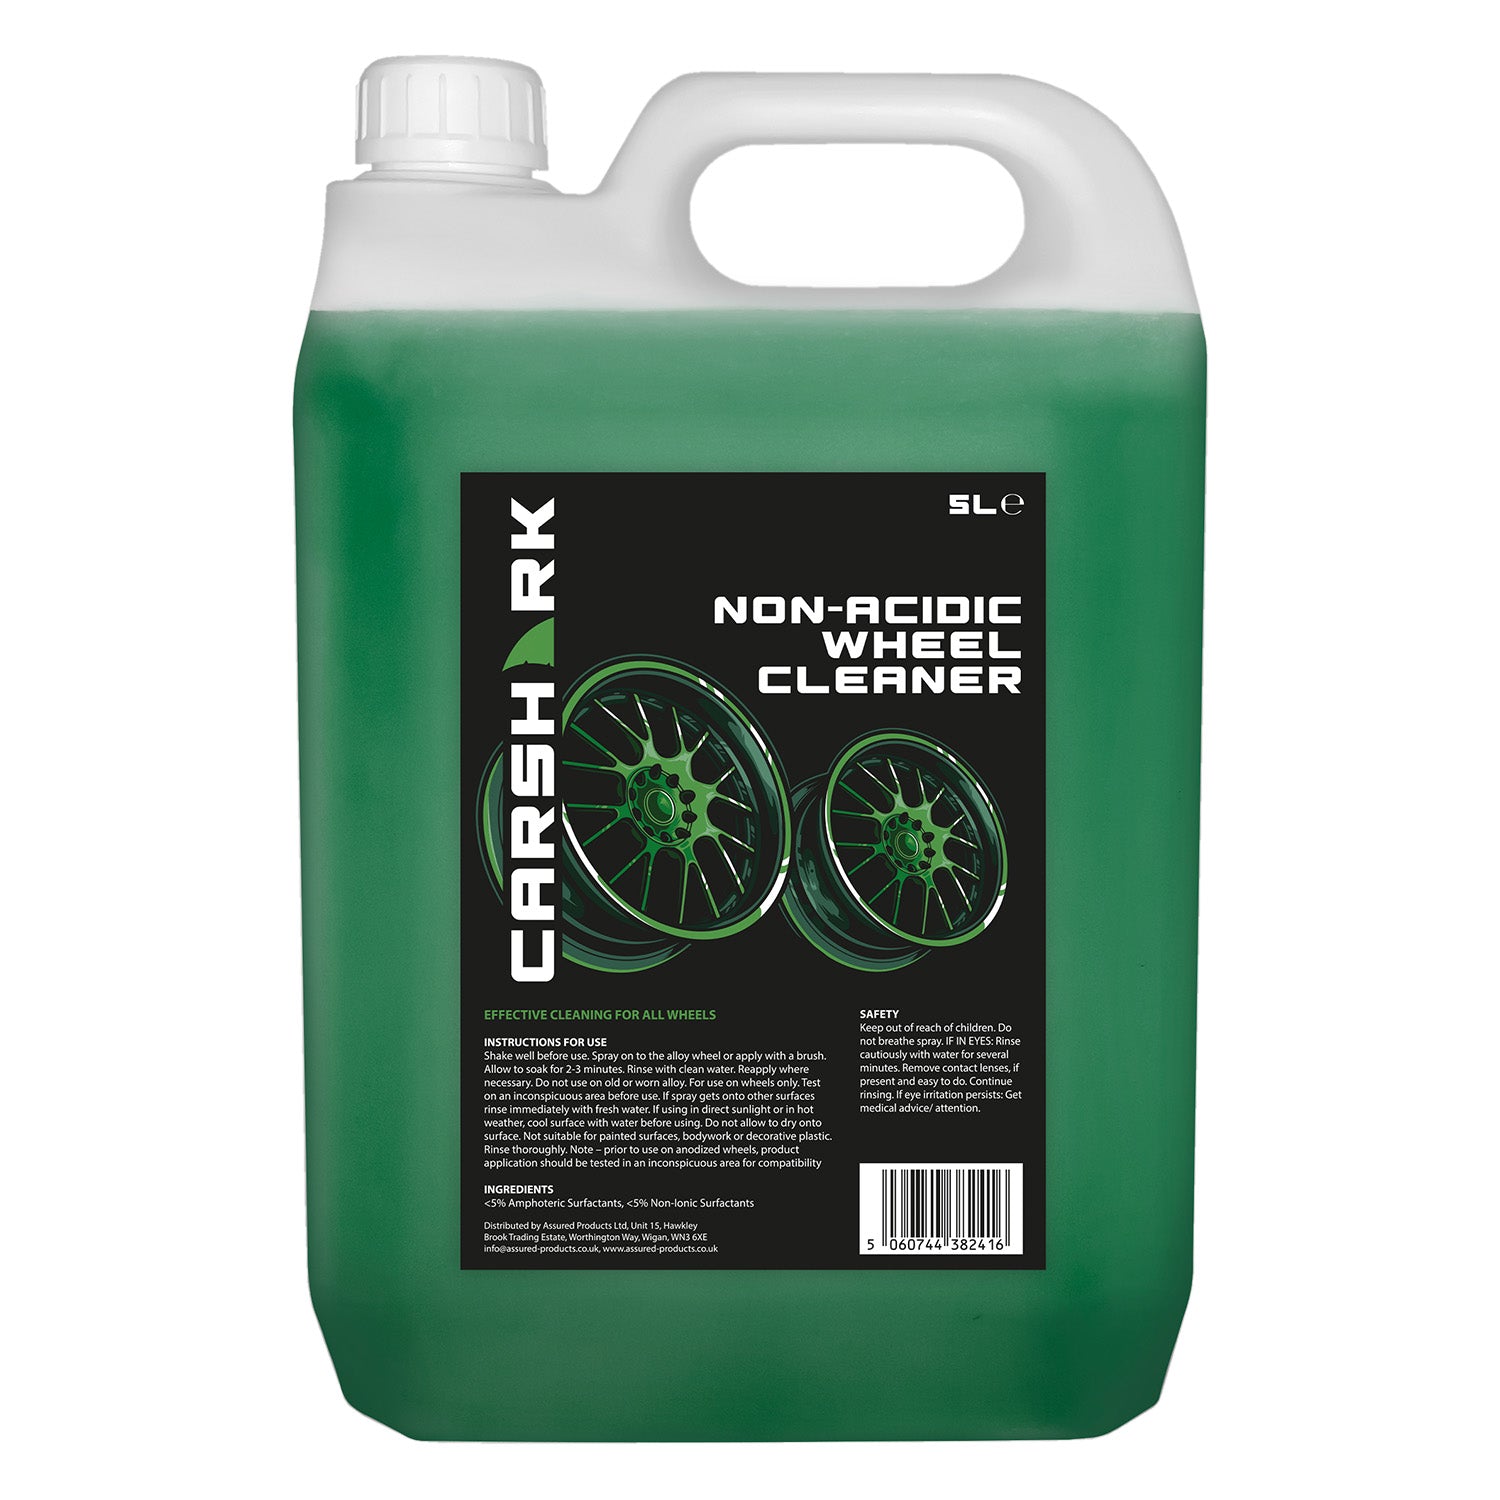 CARSHARK Non-Acidic Wheel Cleaner 5L (with Long Hose Trigger)